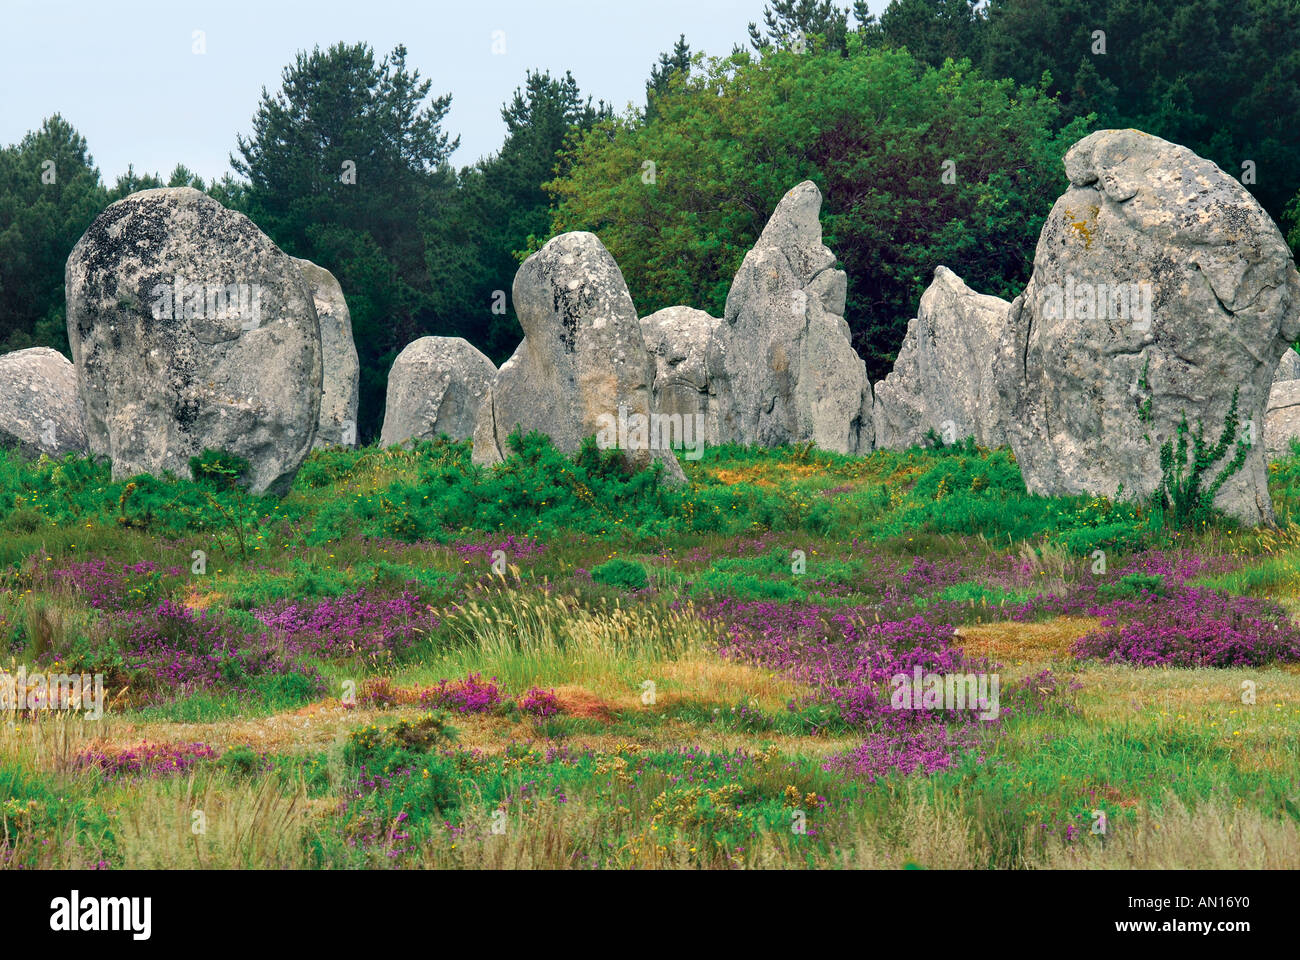 Megalithic stones, Alignment Kermario, Carnac, Brittany, France Stock Photo